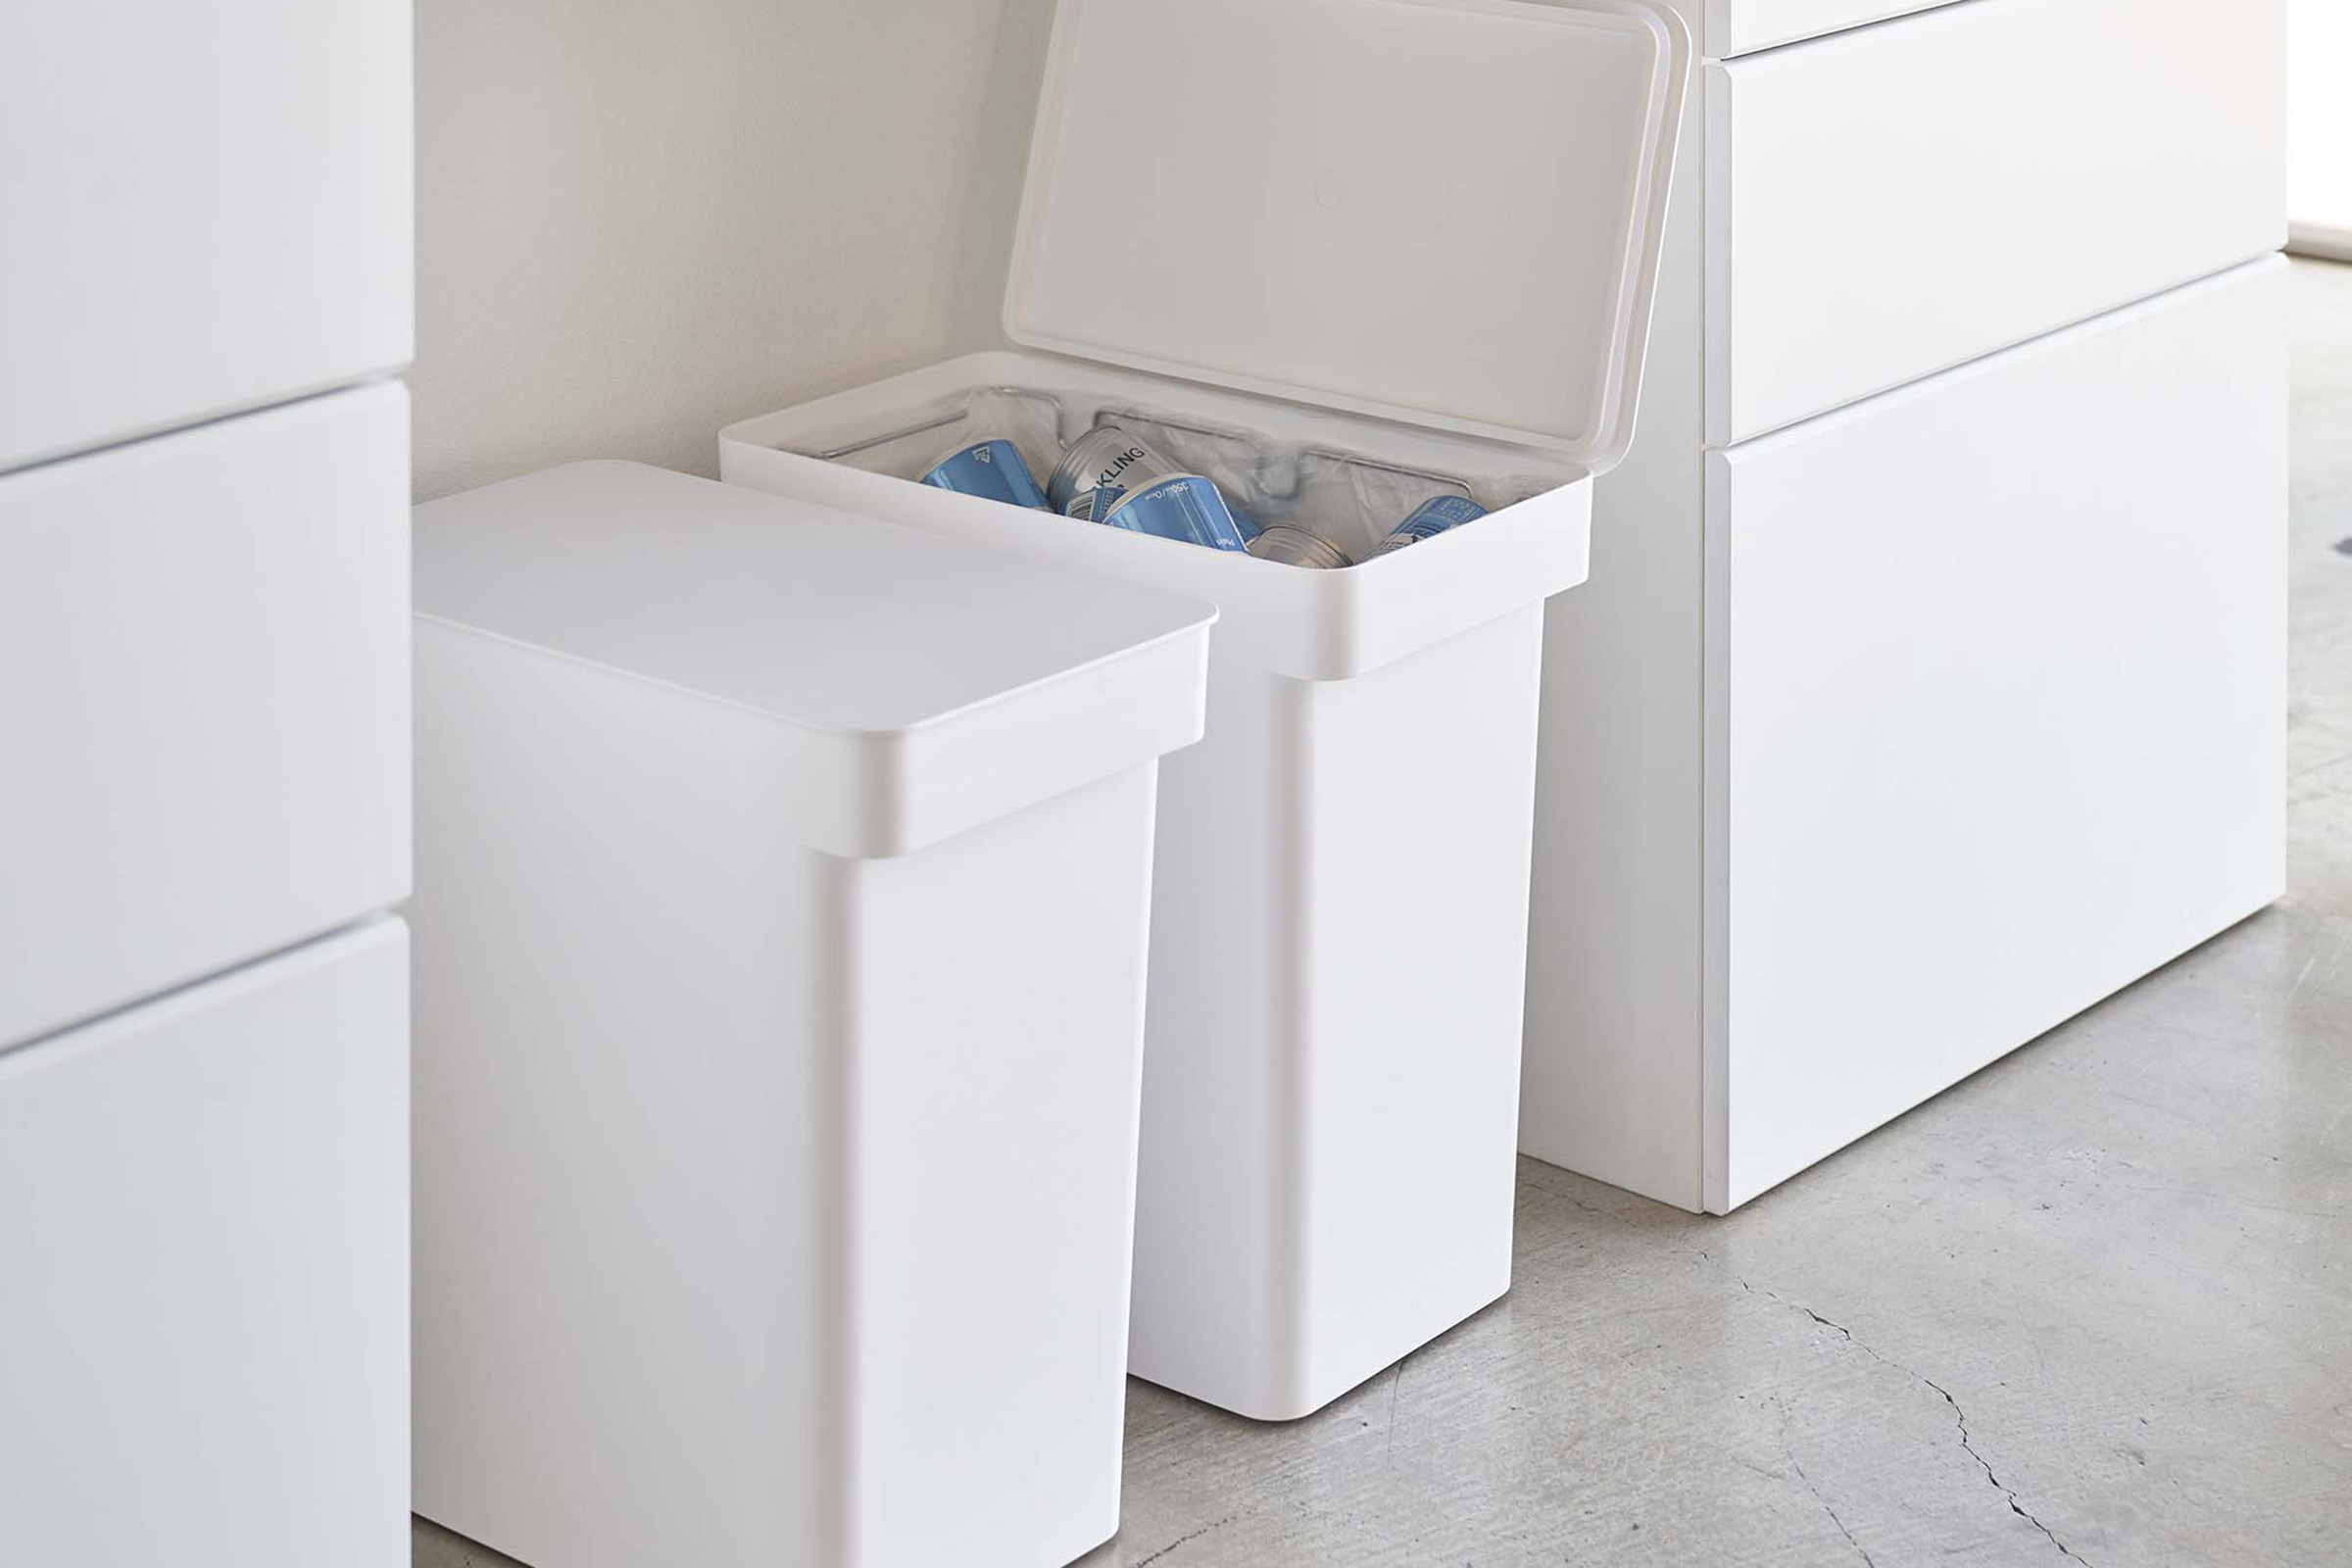 Opened and closed White Rolling Trash Cans in the kitchen by Yamazaki Home.